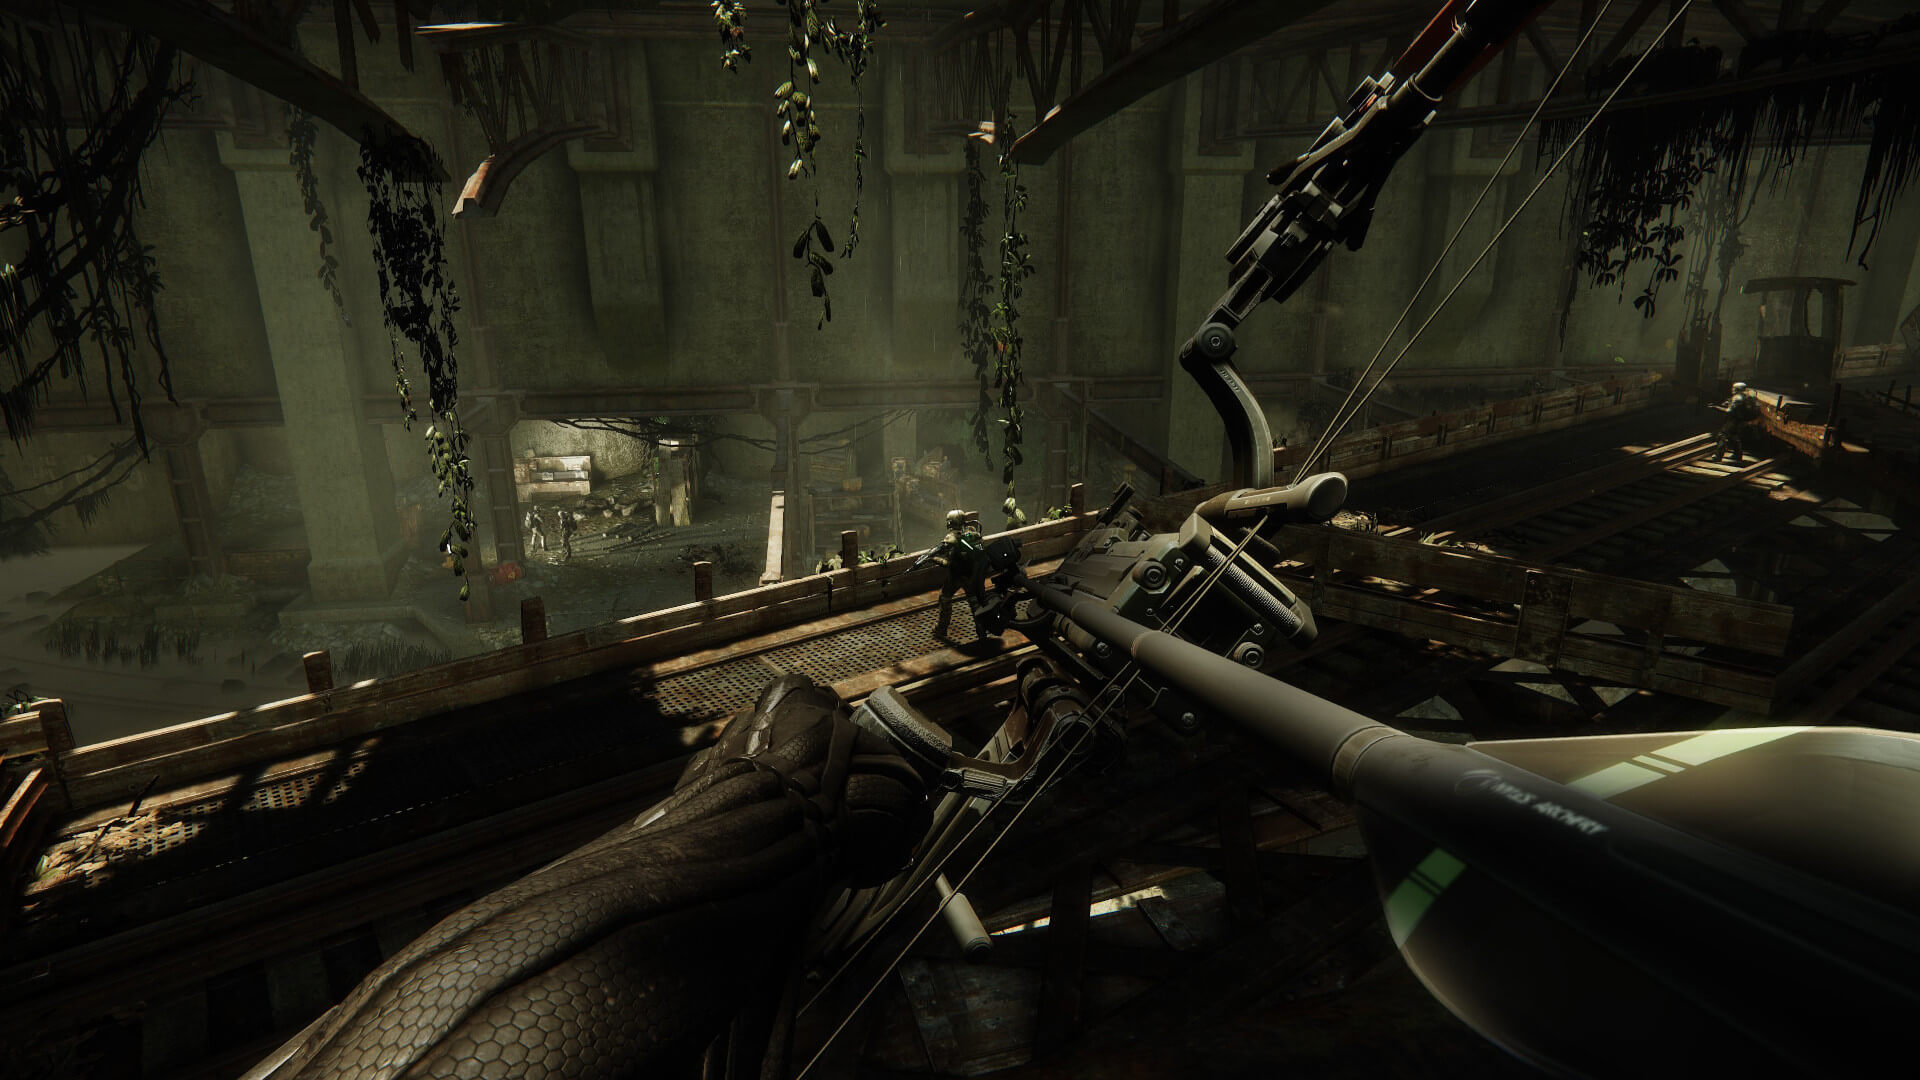 The player aiming a bow at an enemy in the Crysis Remastered Trilogy